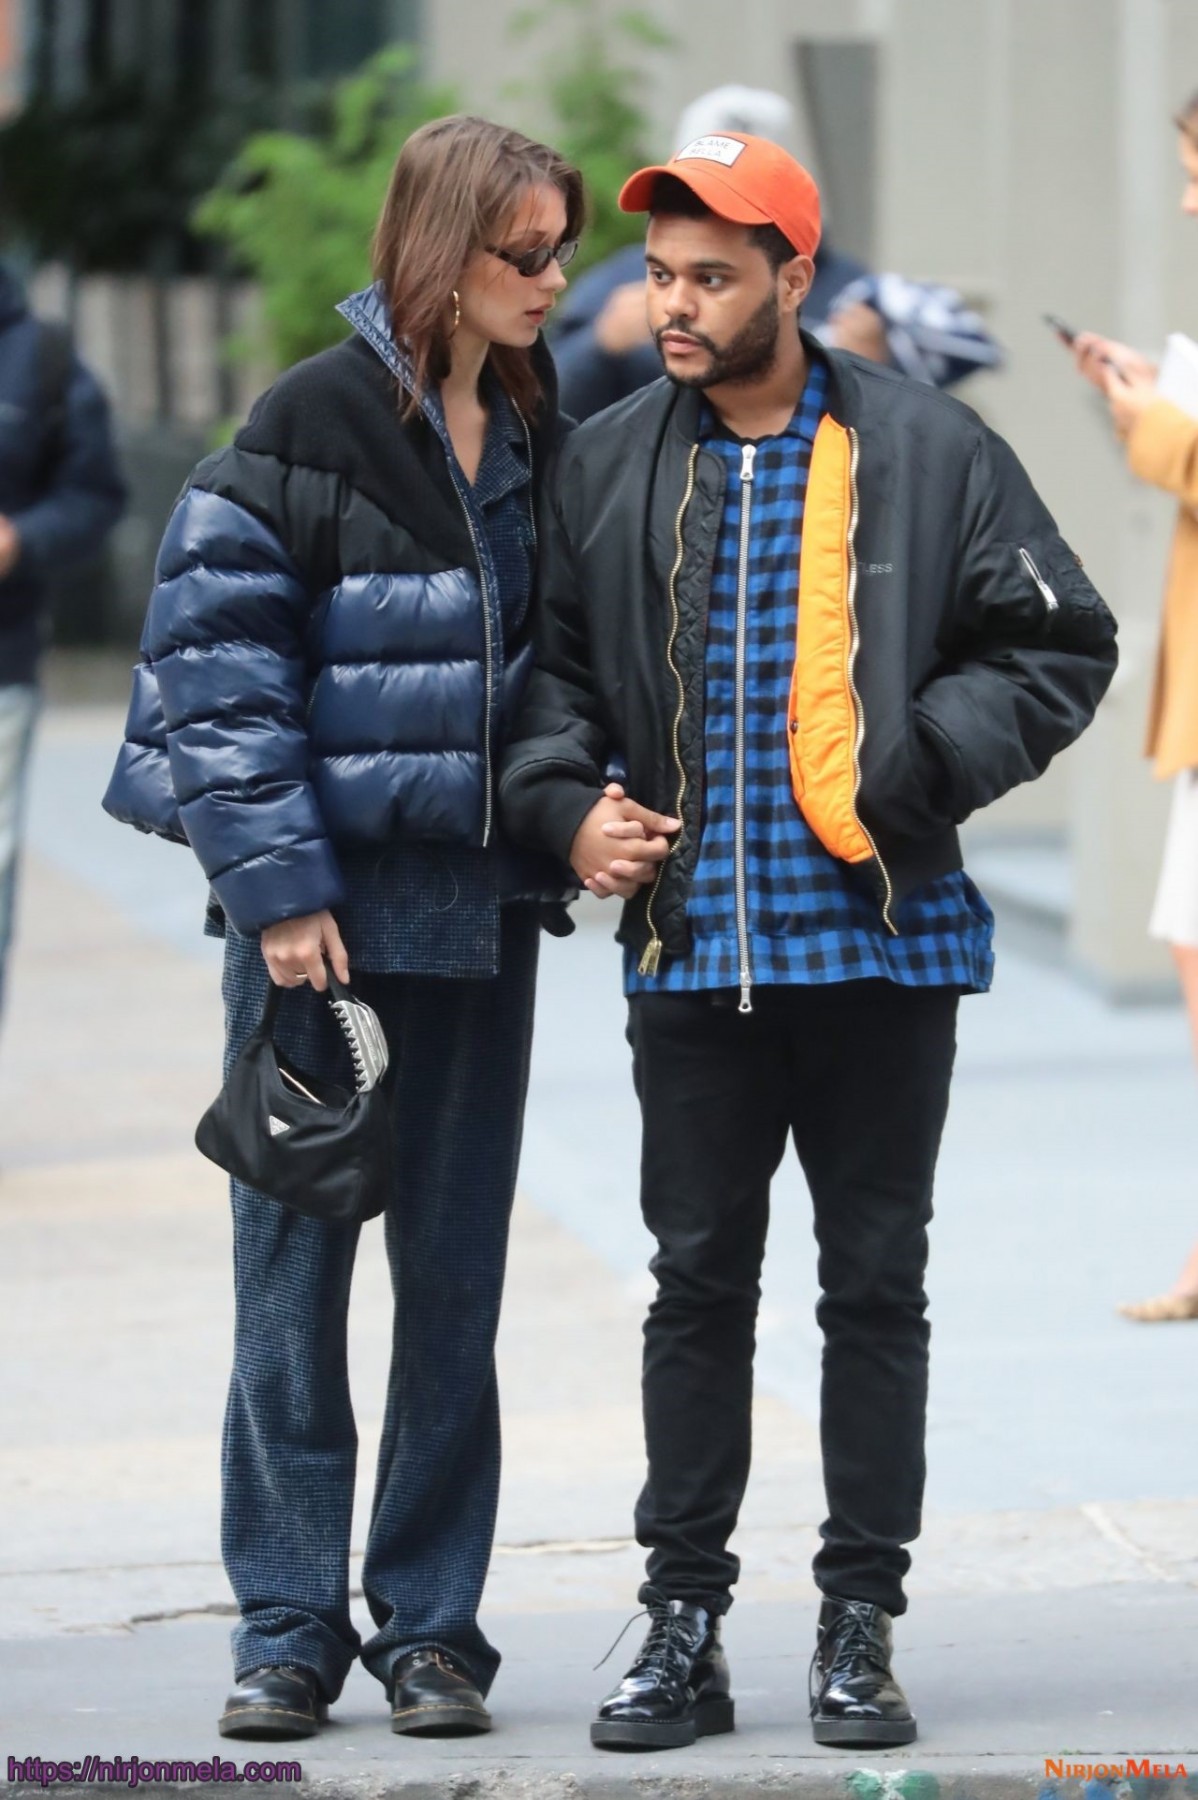 bella-hadid-and-the-weeknd-out-in-new-york-city-10-29-2018-0.jpg